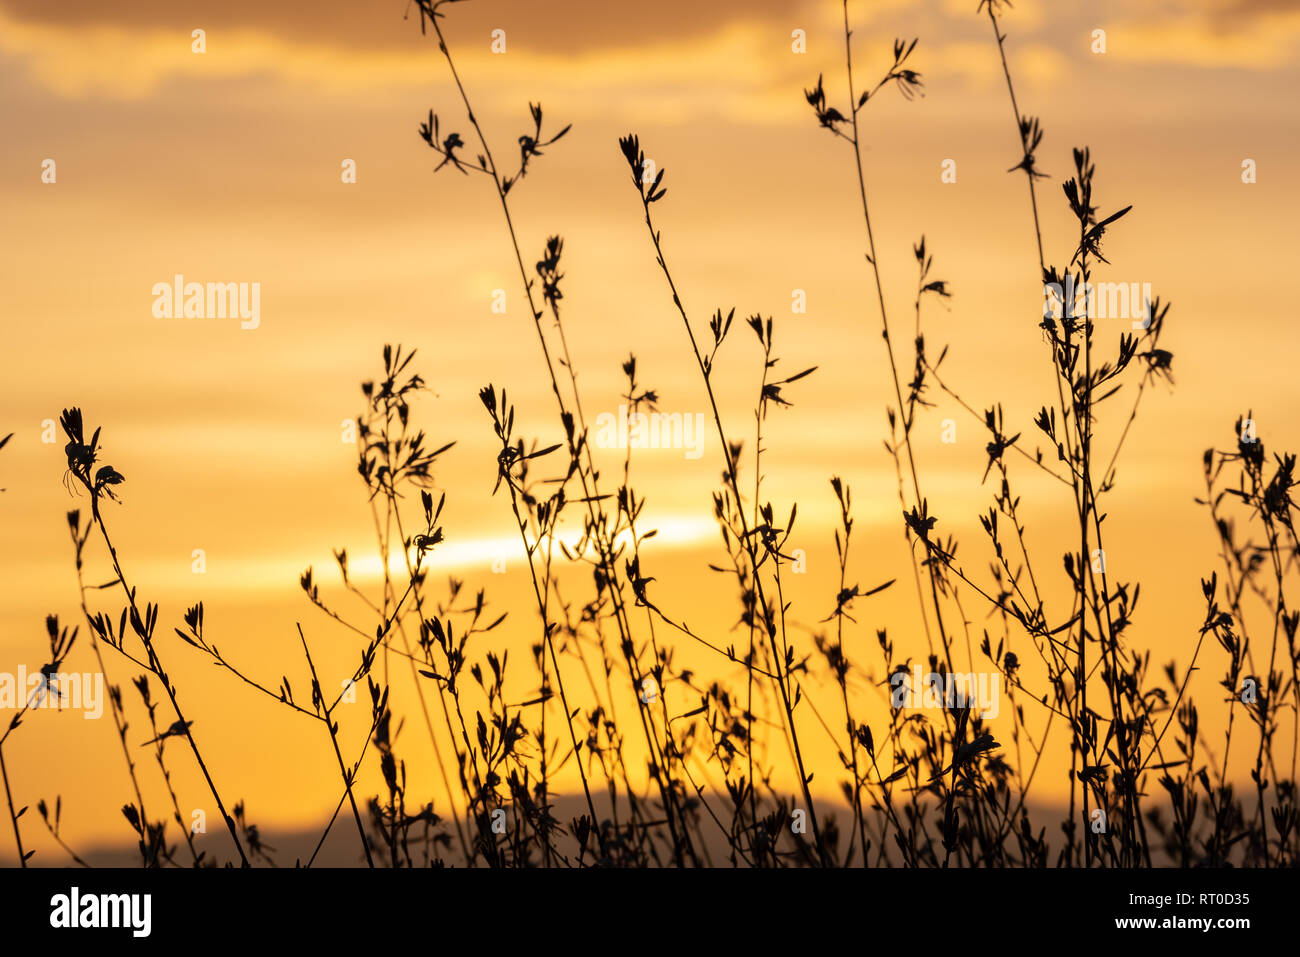 A Gaura Belleza bush silhouetted against a golden sunset. Stock Photo